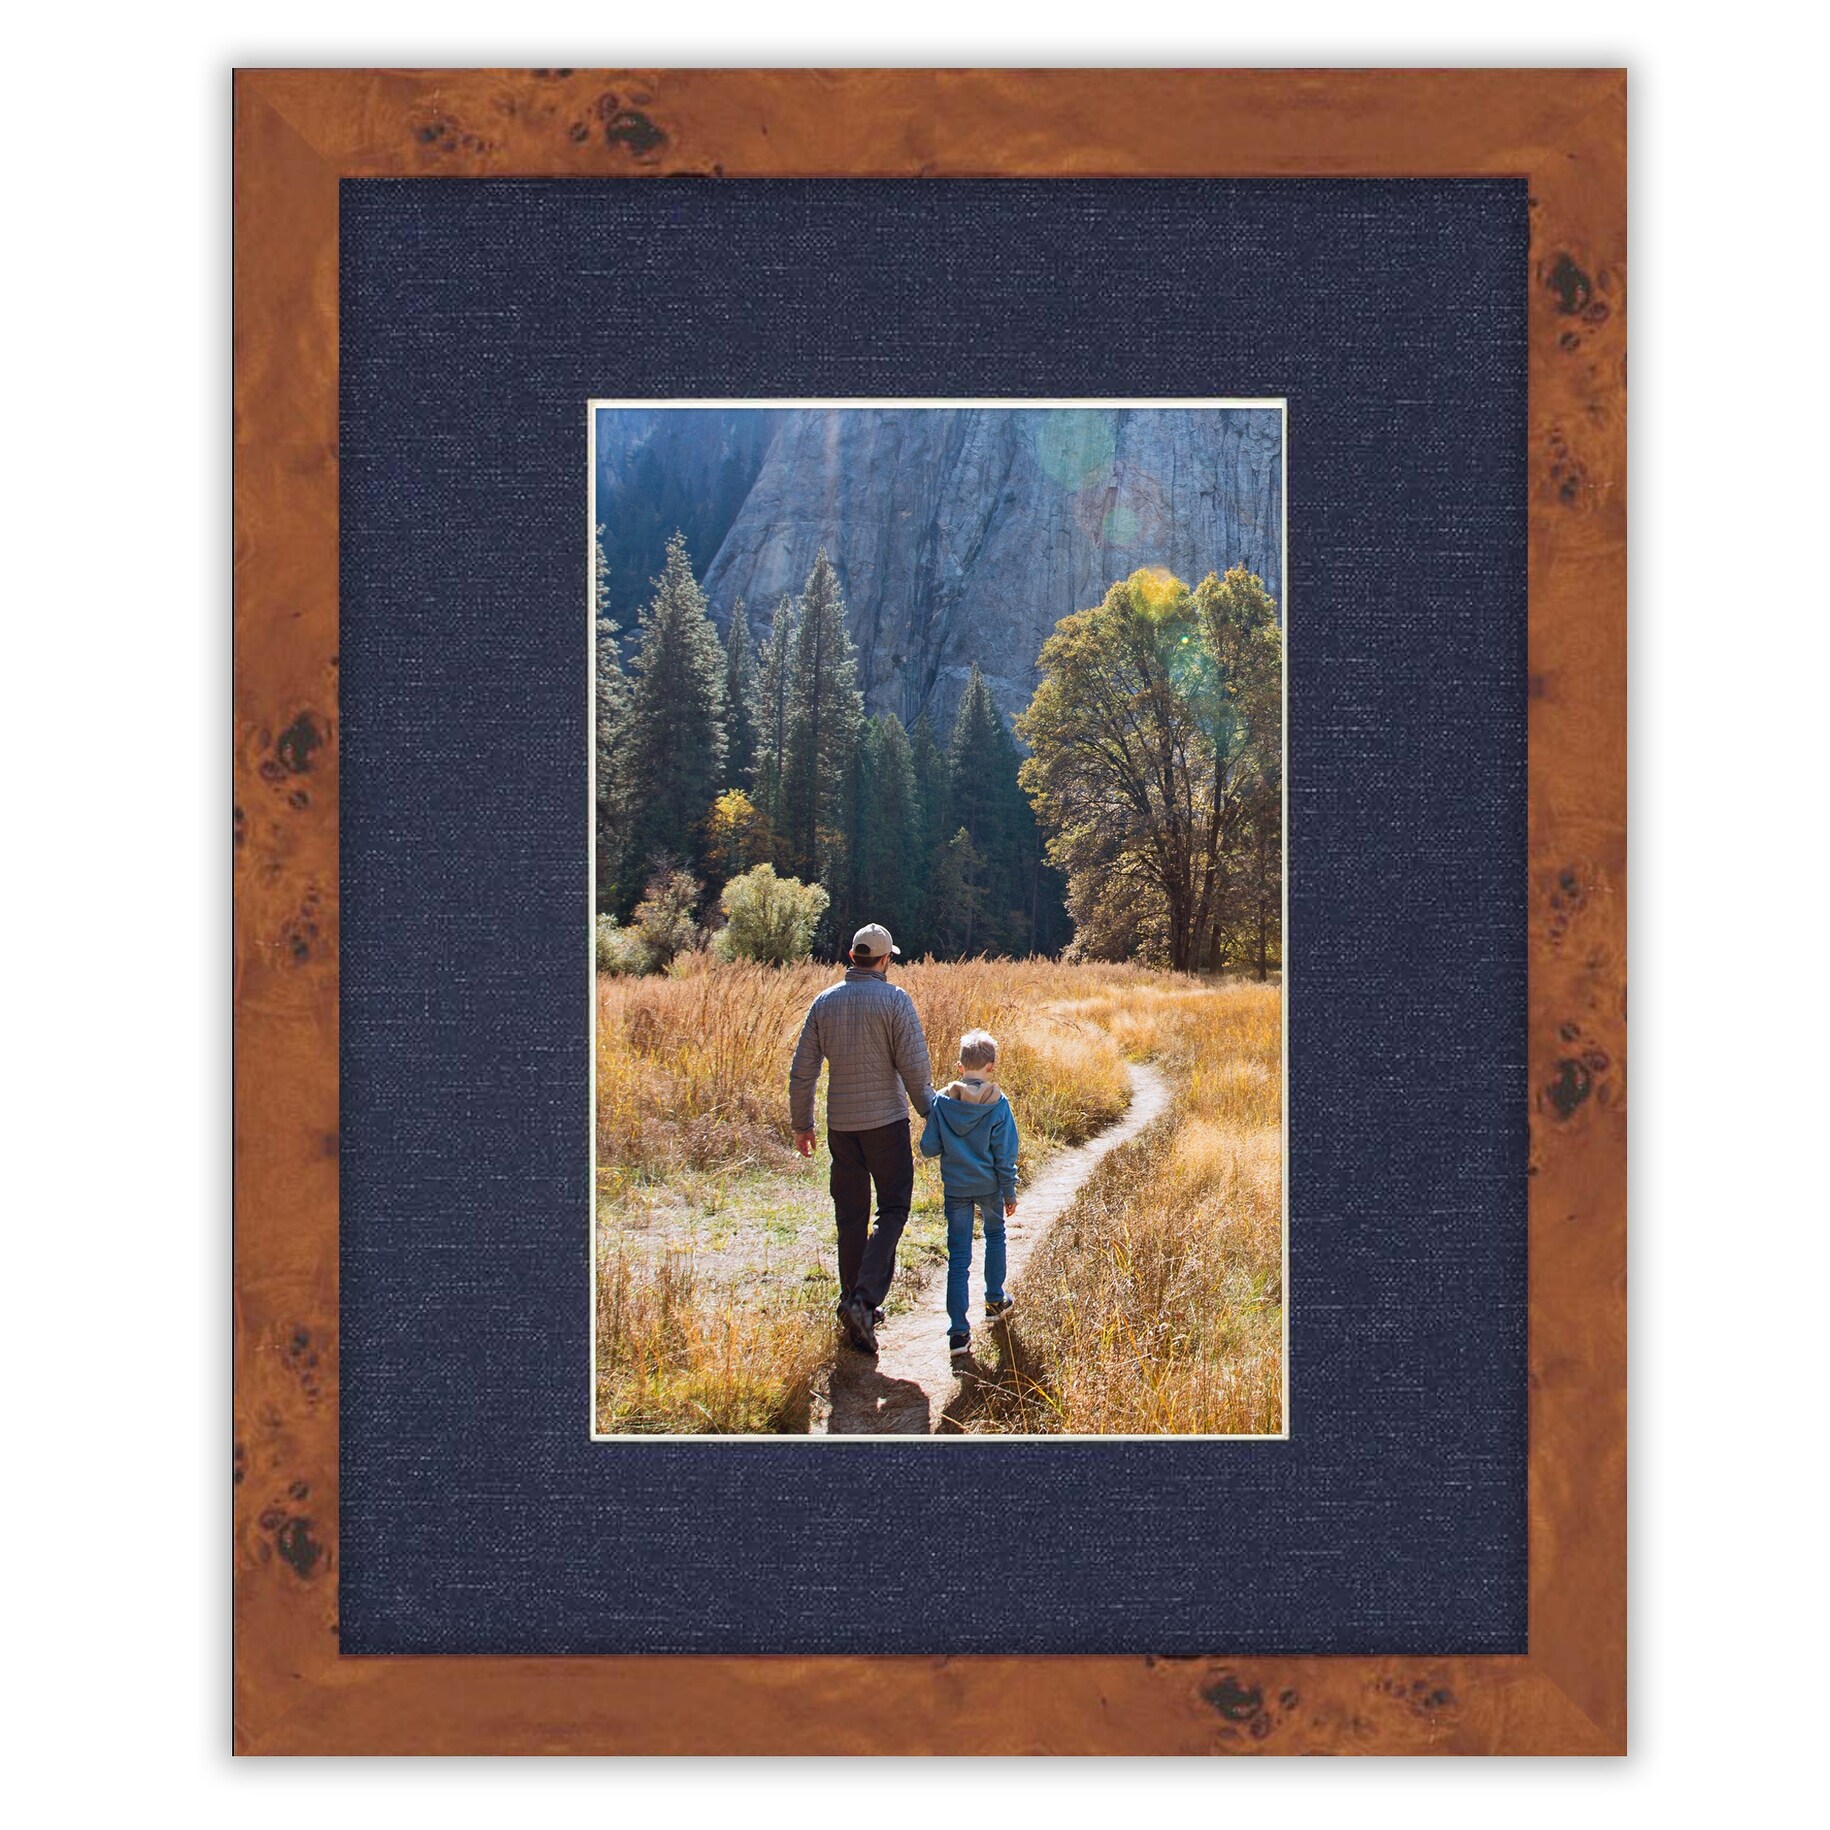  5x7 Mat for 8x10 Frame - Precut Mat Board Acid-Free Navy 5x7  Photo Matte Made to Fit a 8x10 Picture Frame, Premium Matboard for Family  Photos, Show Kits, Art, Picture Framing